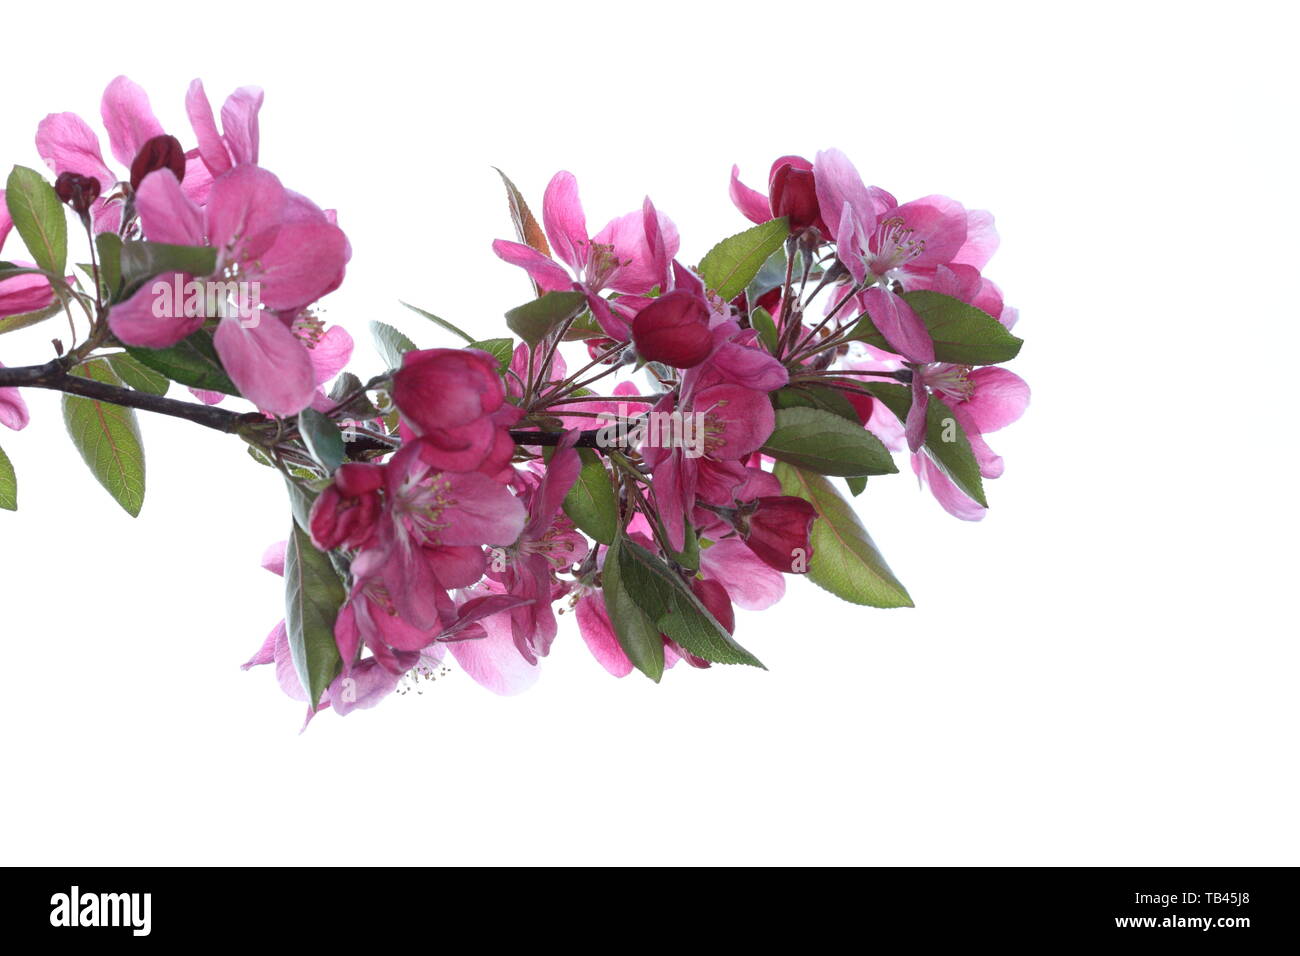 Deep pink blossom flowers on a branch Stock Photo